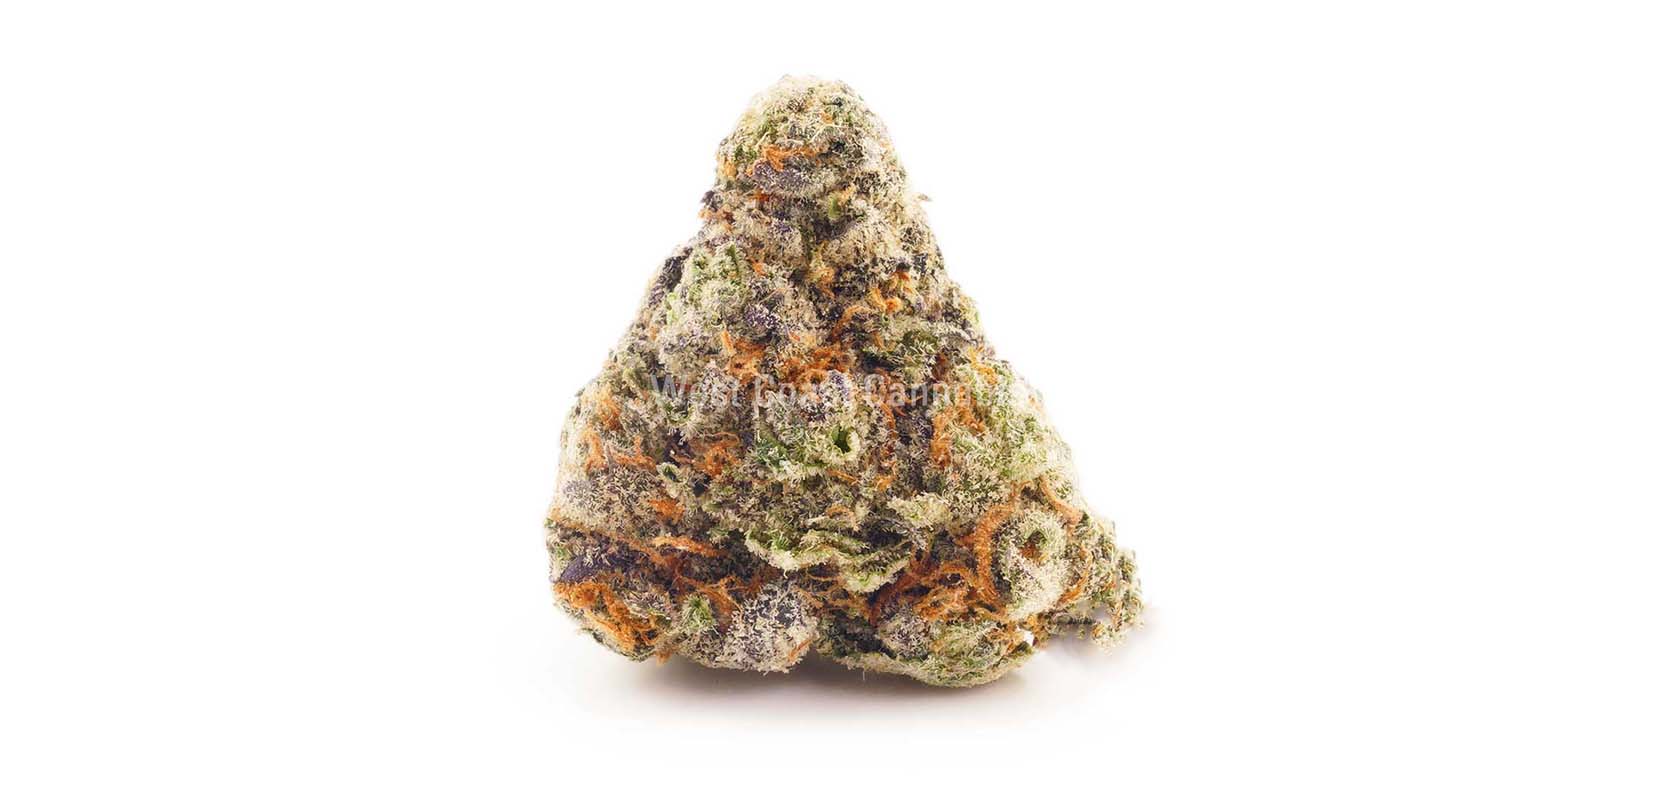 Juicy Fruit budget buds from online dispensary in Nunavut. Cheap weed. Buy weed online Canada.